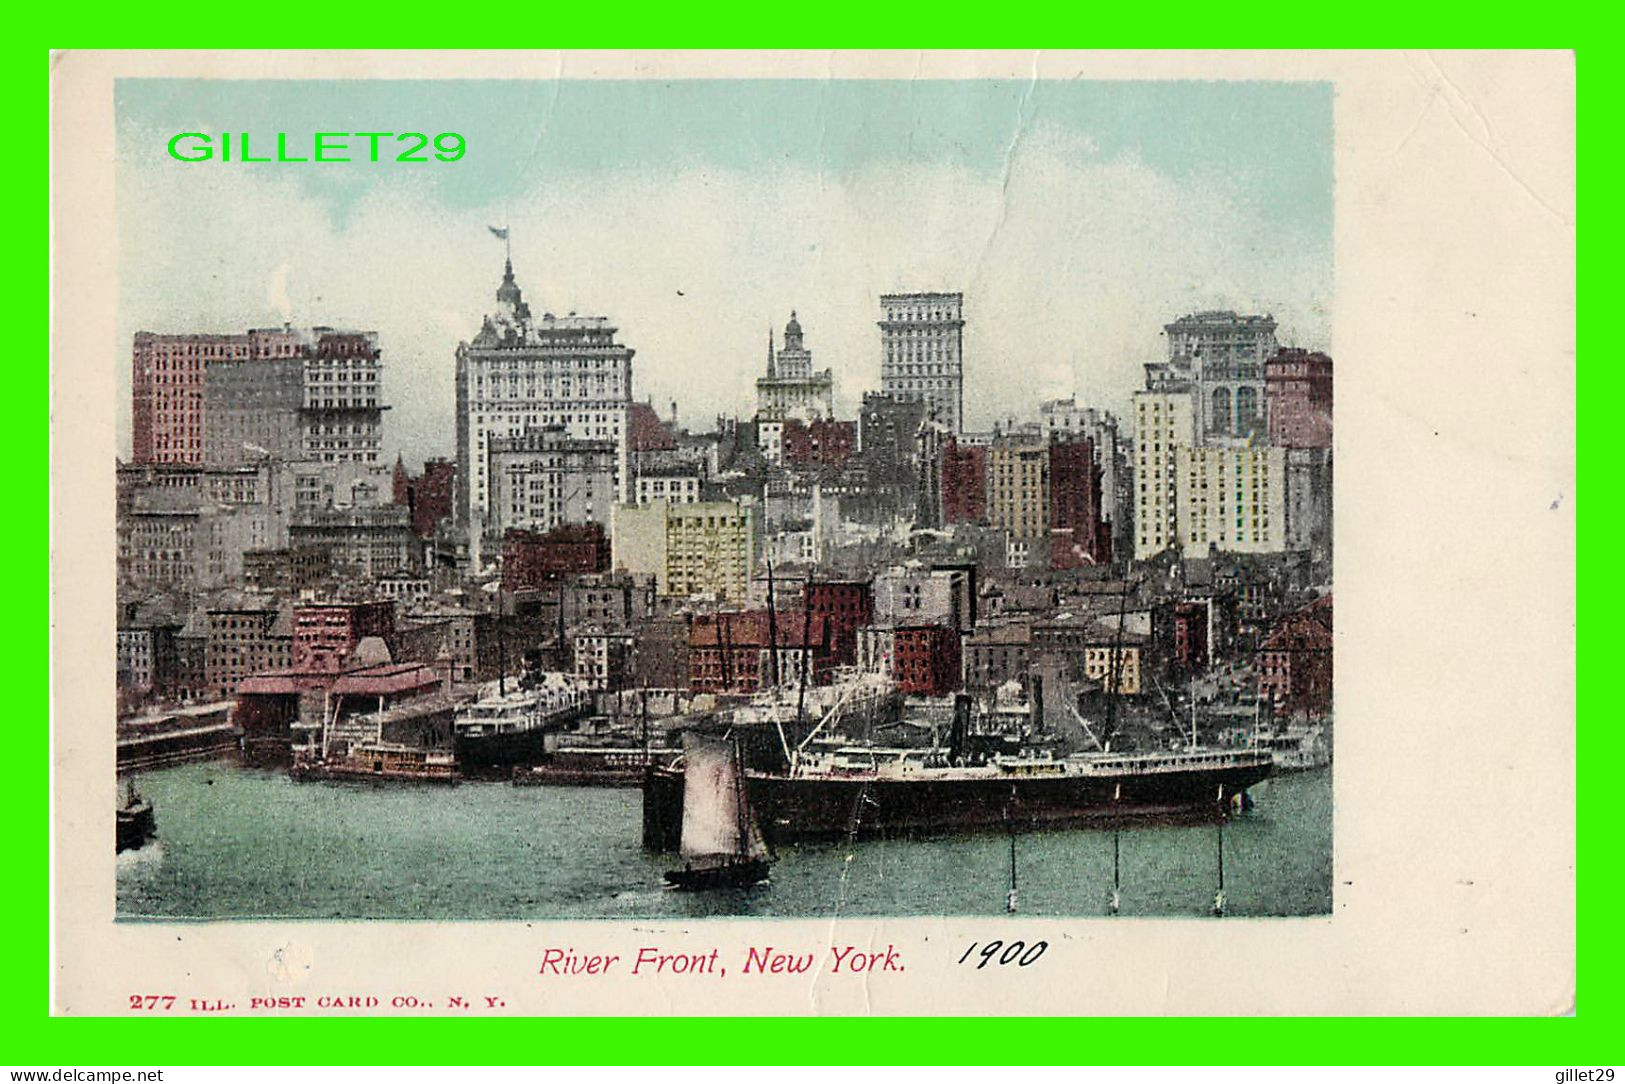 NEW YORK CITY, NY - RIVER FRONT - ANIMATED WITH SHIPS - ILL. POST CARD CO - - Hudson River